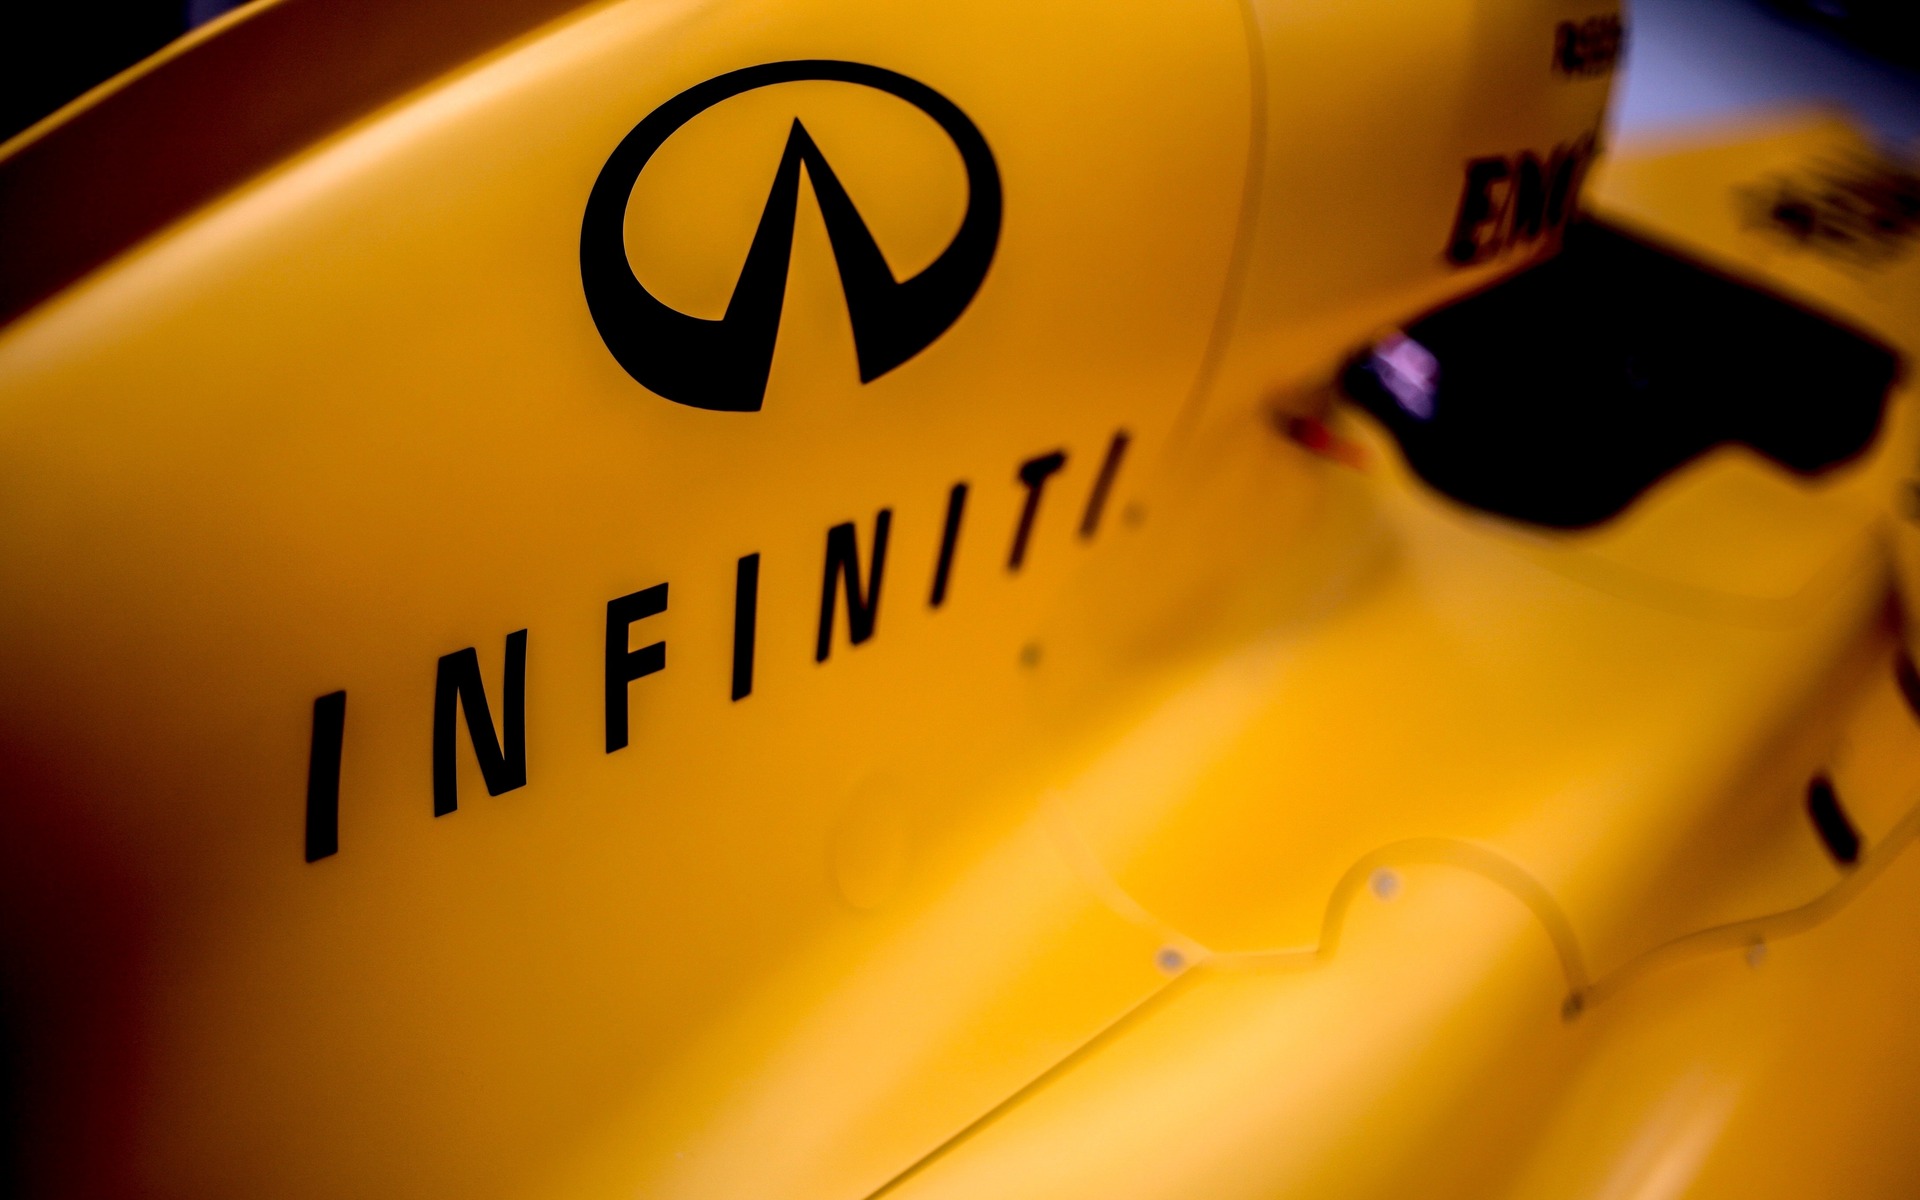 Infiniti logo on the engine cover of the Renault F1 car